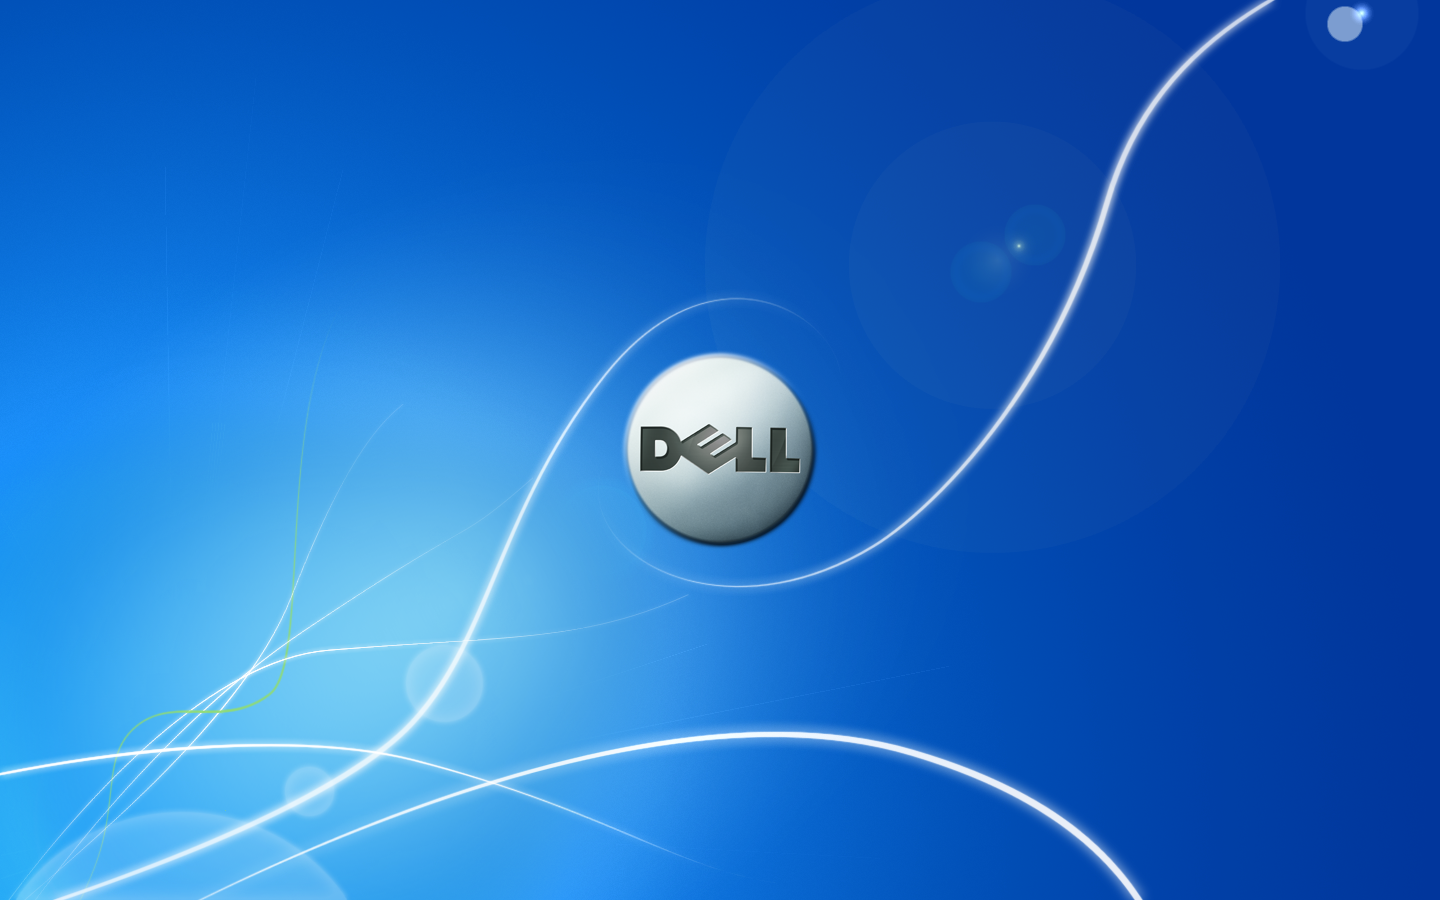 Dell Wallpapers - Wallpaper Cave